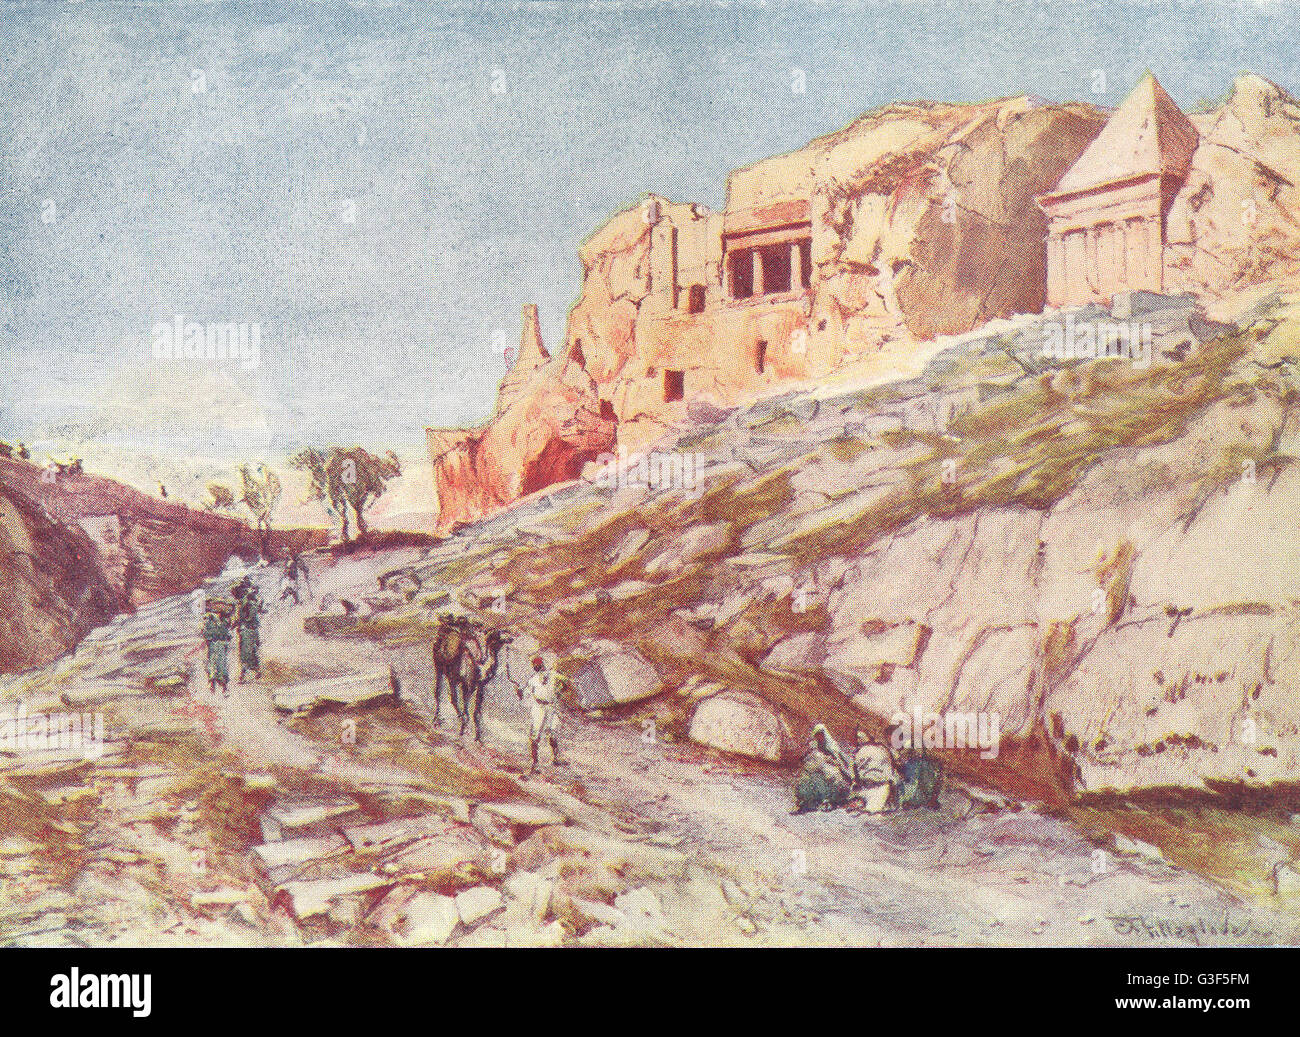 ISRAEL: The rock-cut Tombs of the valley of Jehoshaphat, antique print 1902 Stock Photo